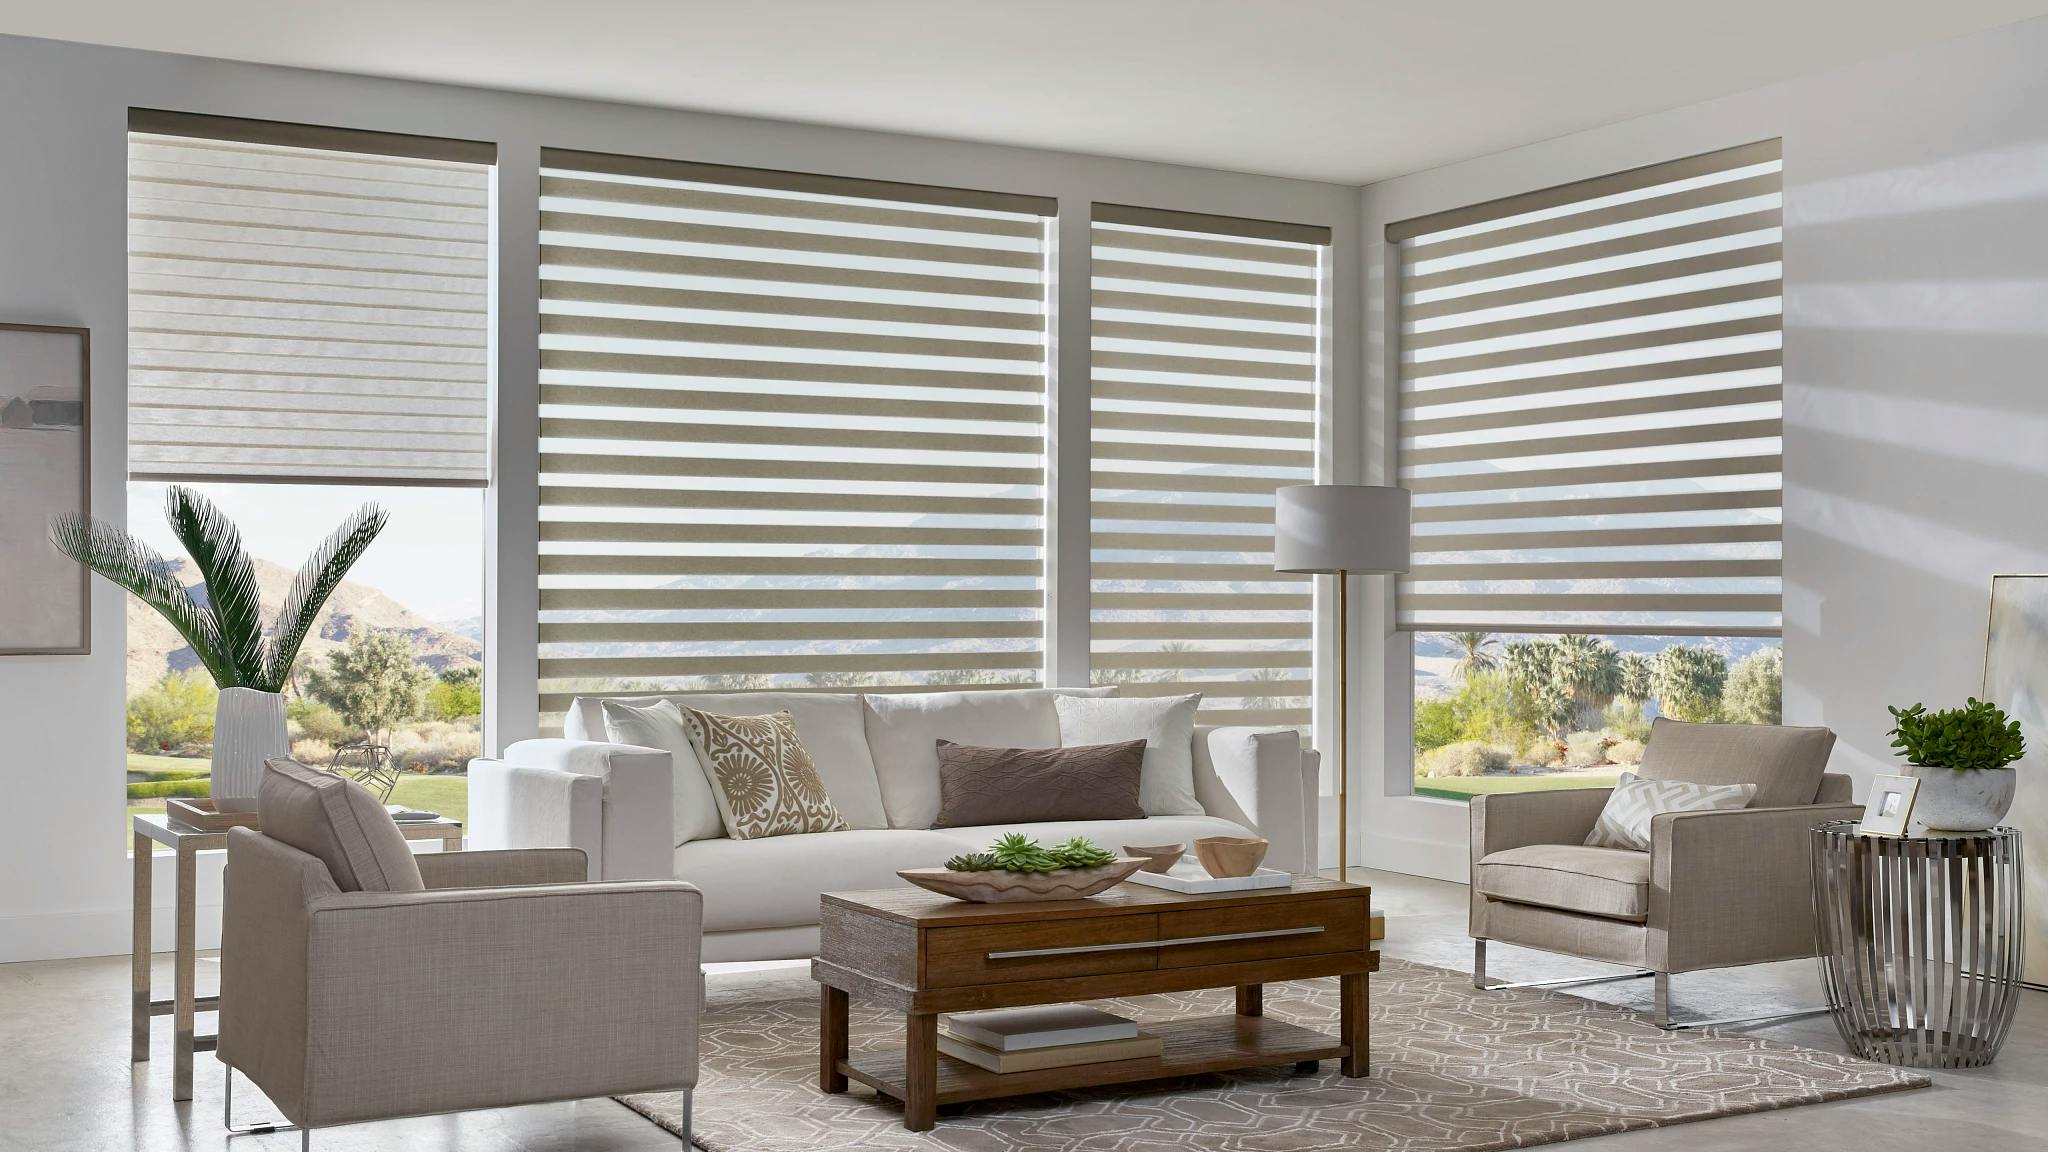 Four motorized gray banded shades in a brightly lit living room.